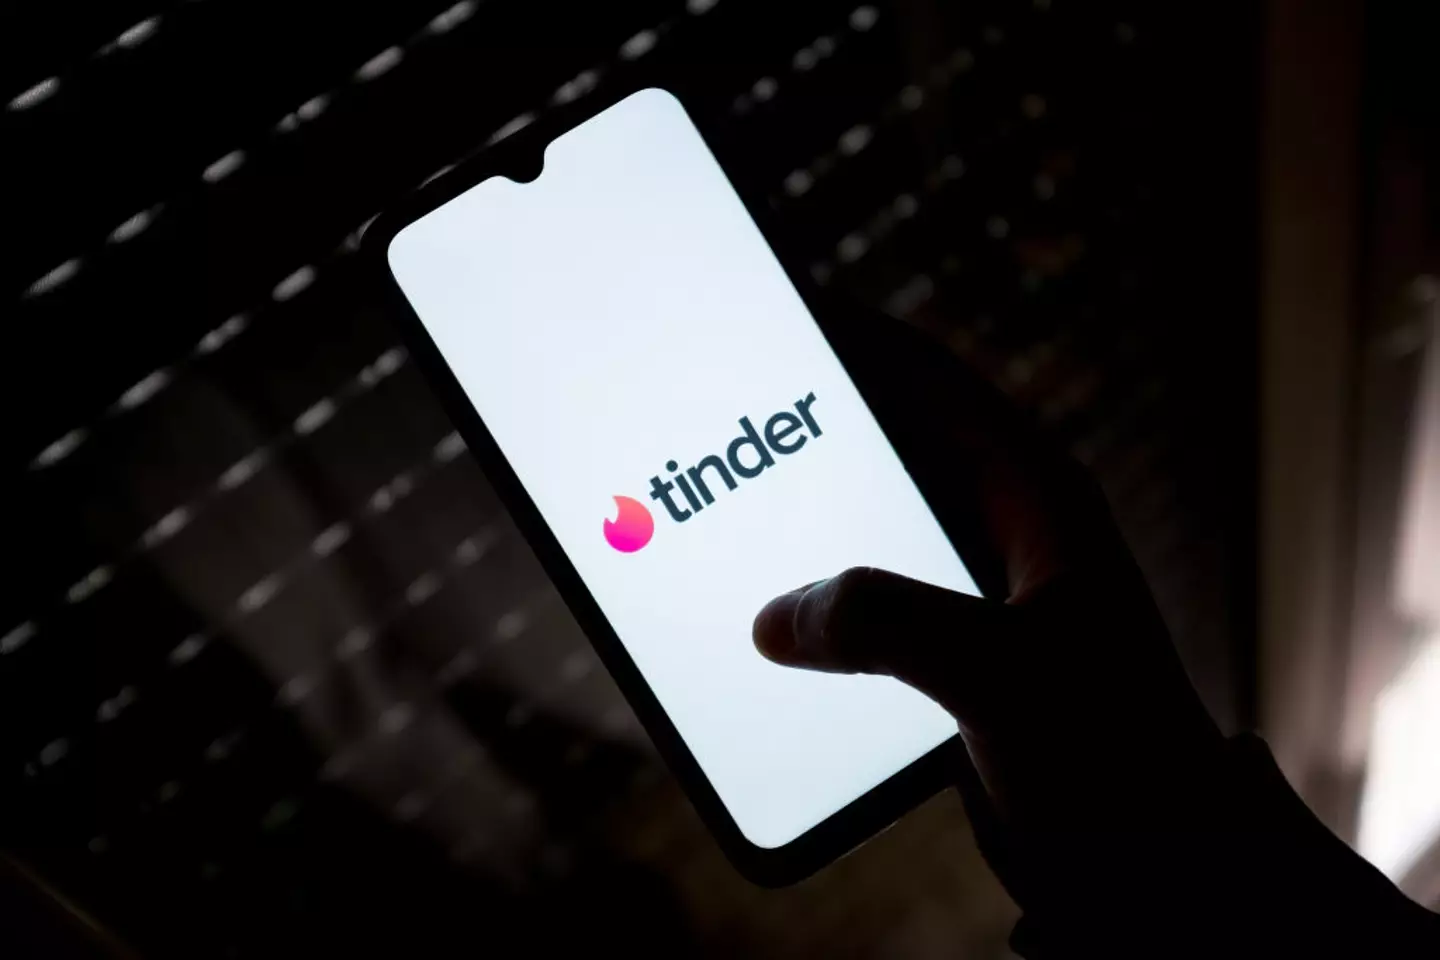 Tinder has implemented various ways to warn users of potential scams or fraud. (Getty Stock Photo)